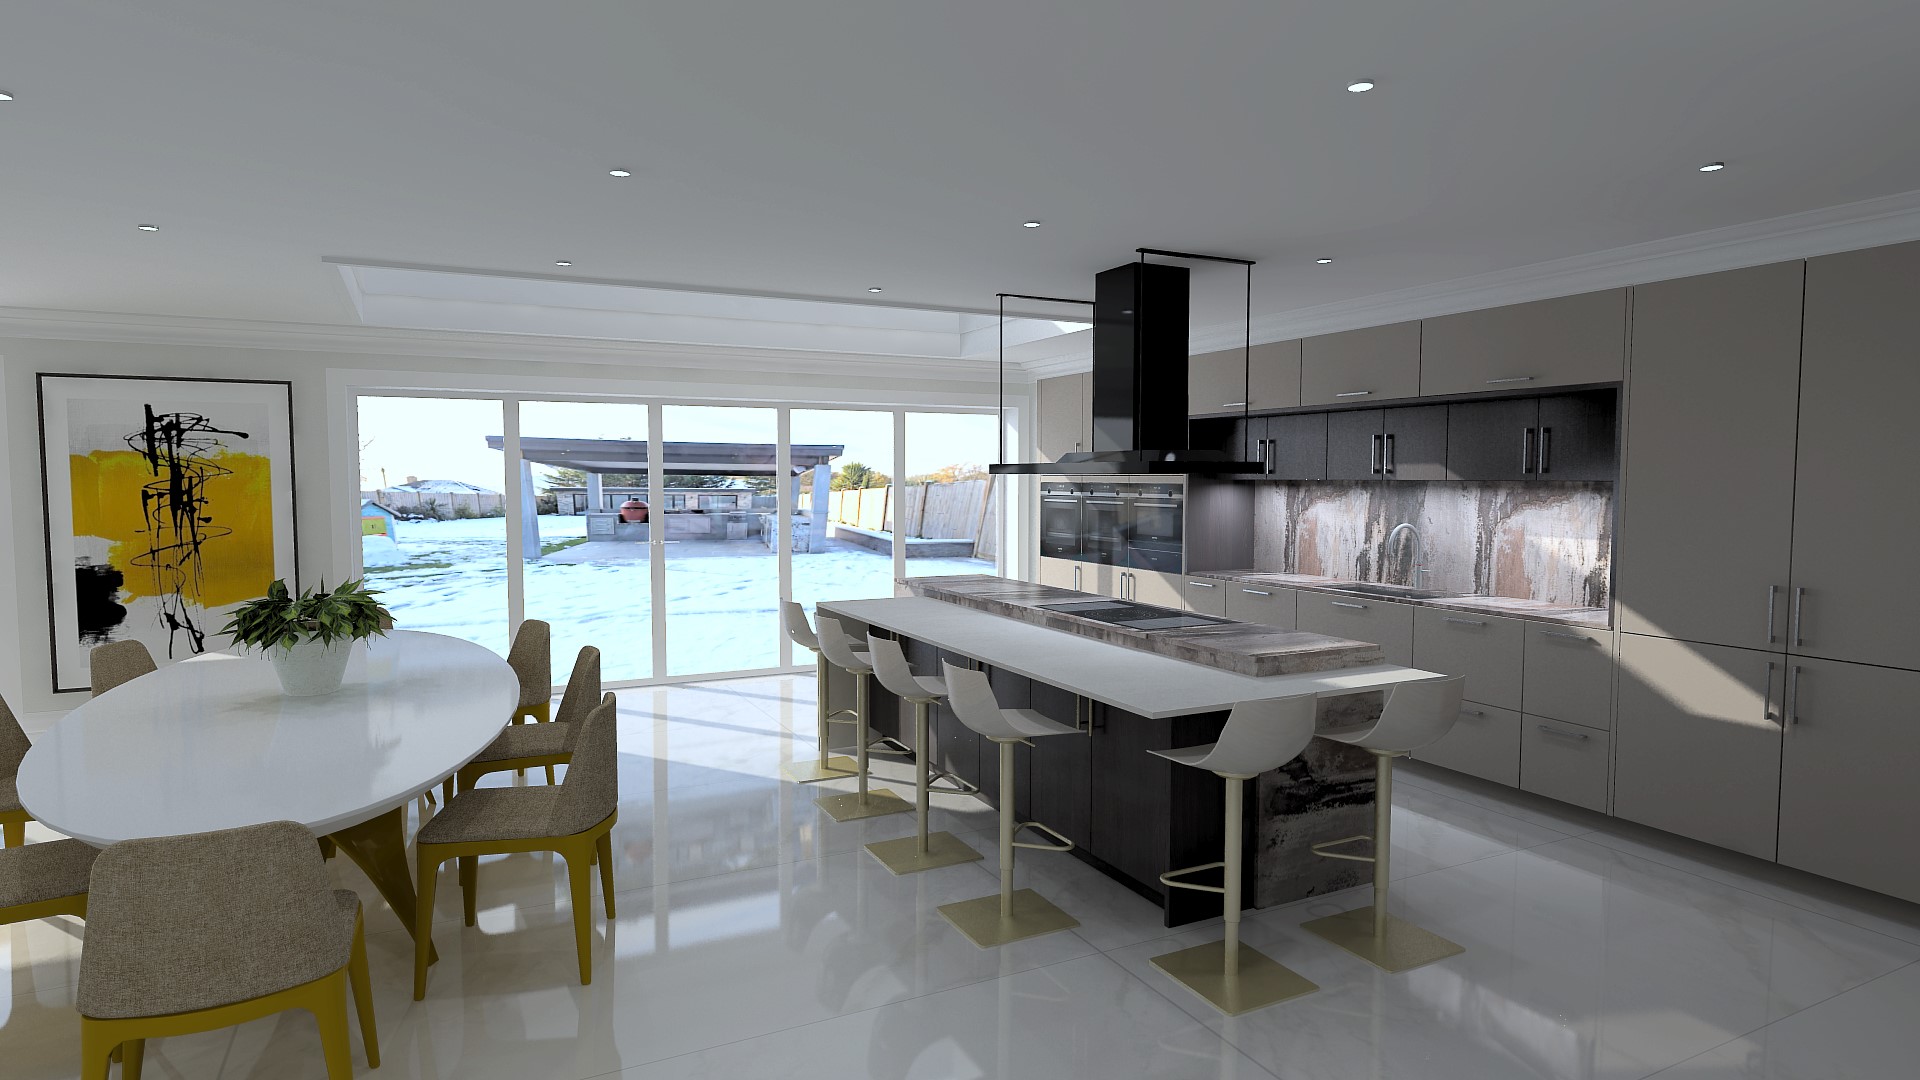 Island Oasis: A Modern Kitchen Design with an Inviting Seating Area